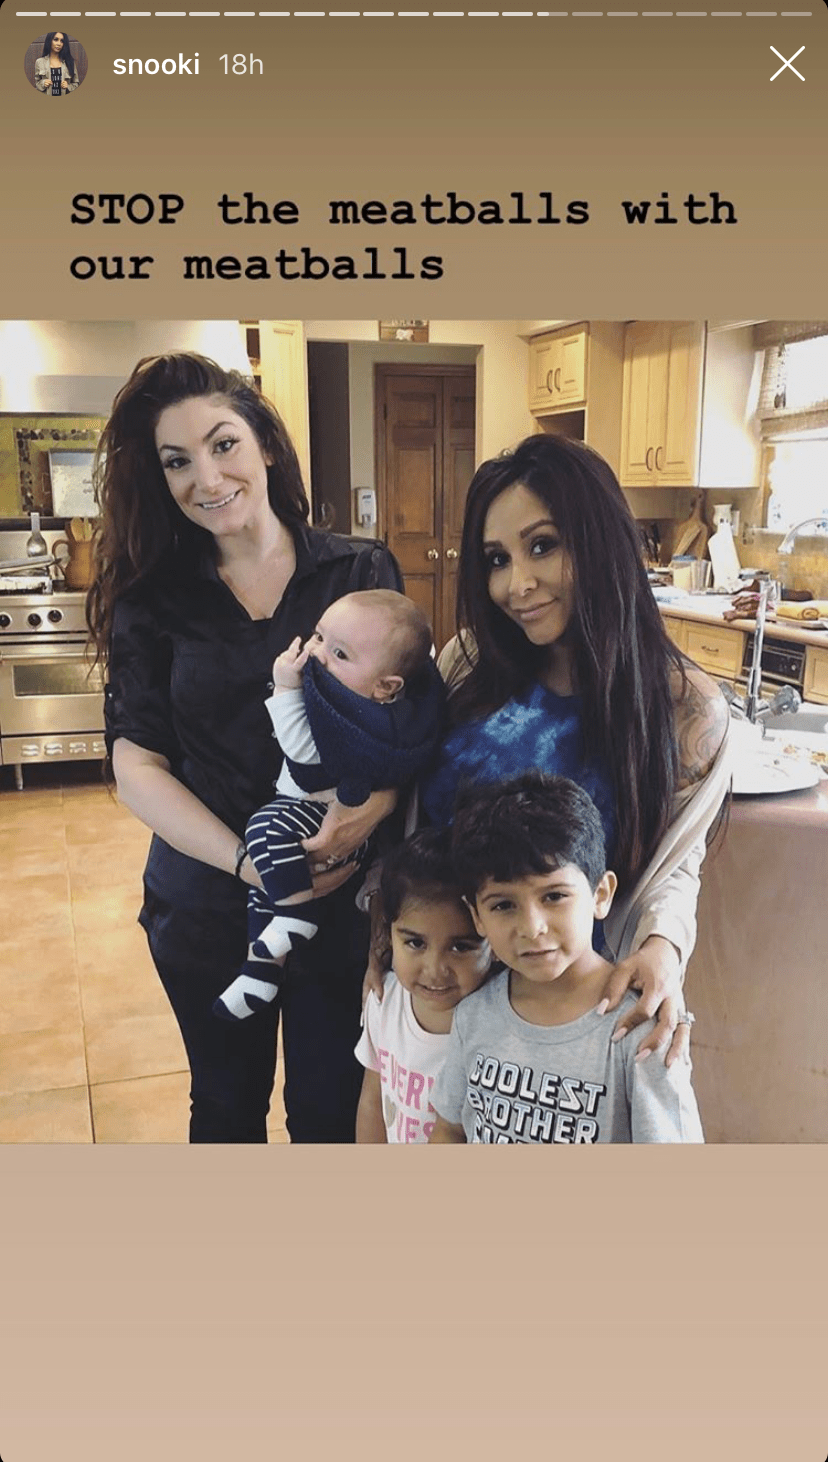 Jersey Shore': Snooki Posts Adorable Pics Of 5-Day-Old Baby Angelo